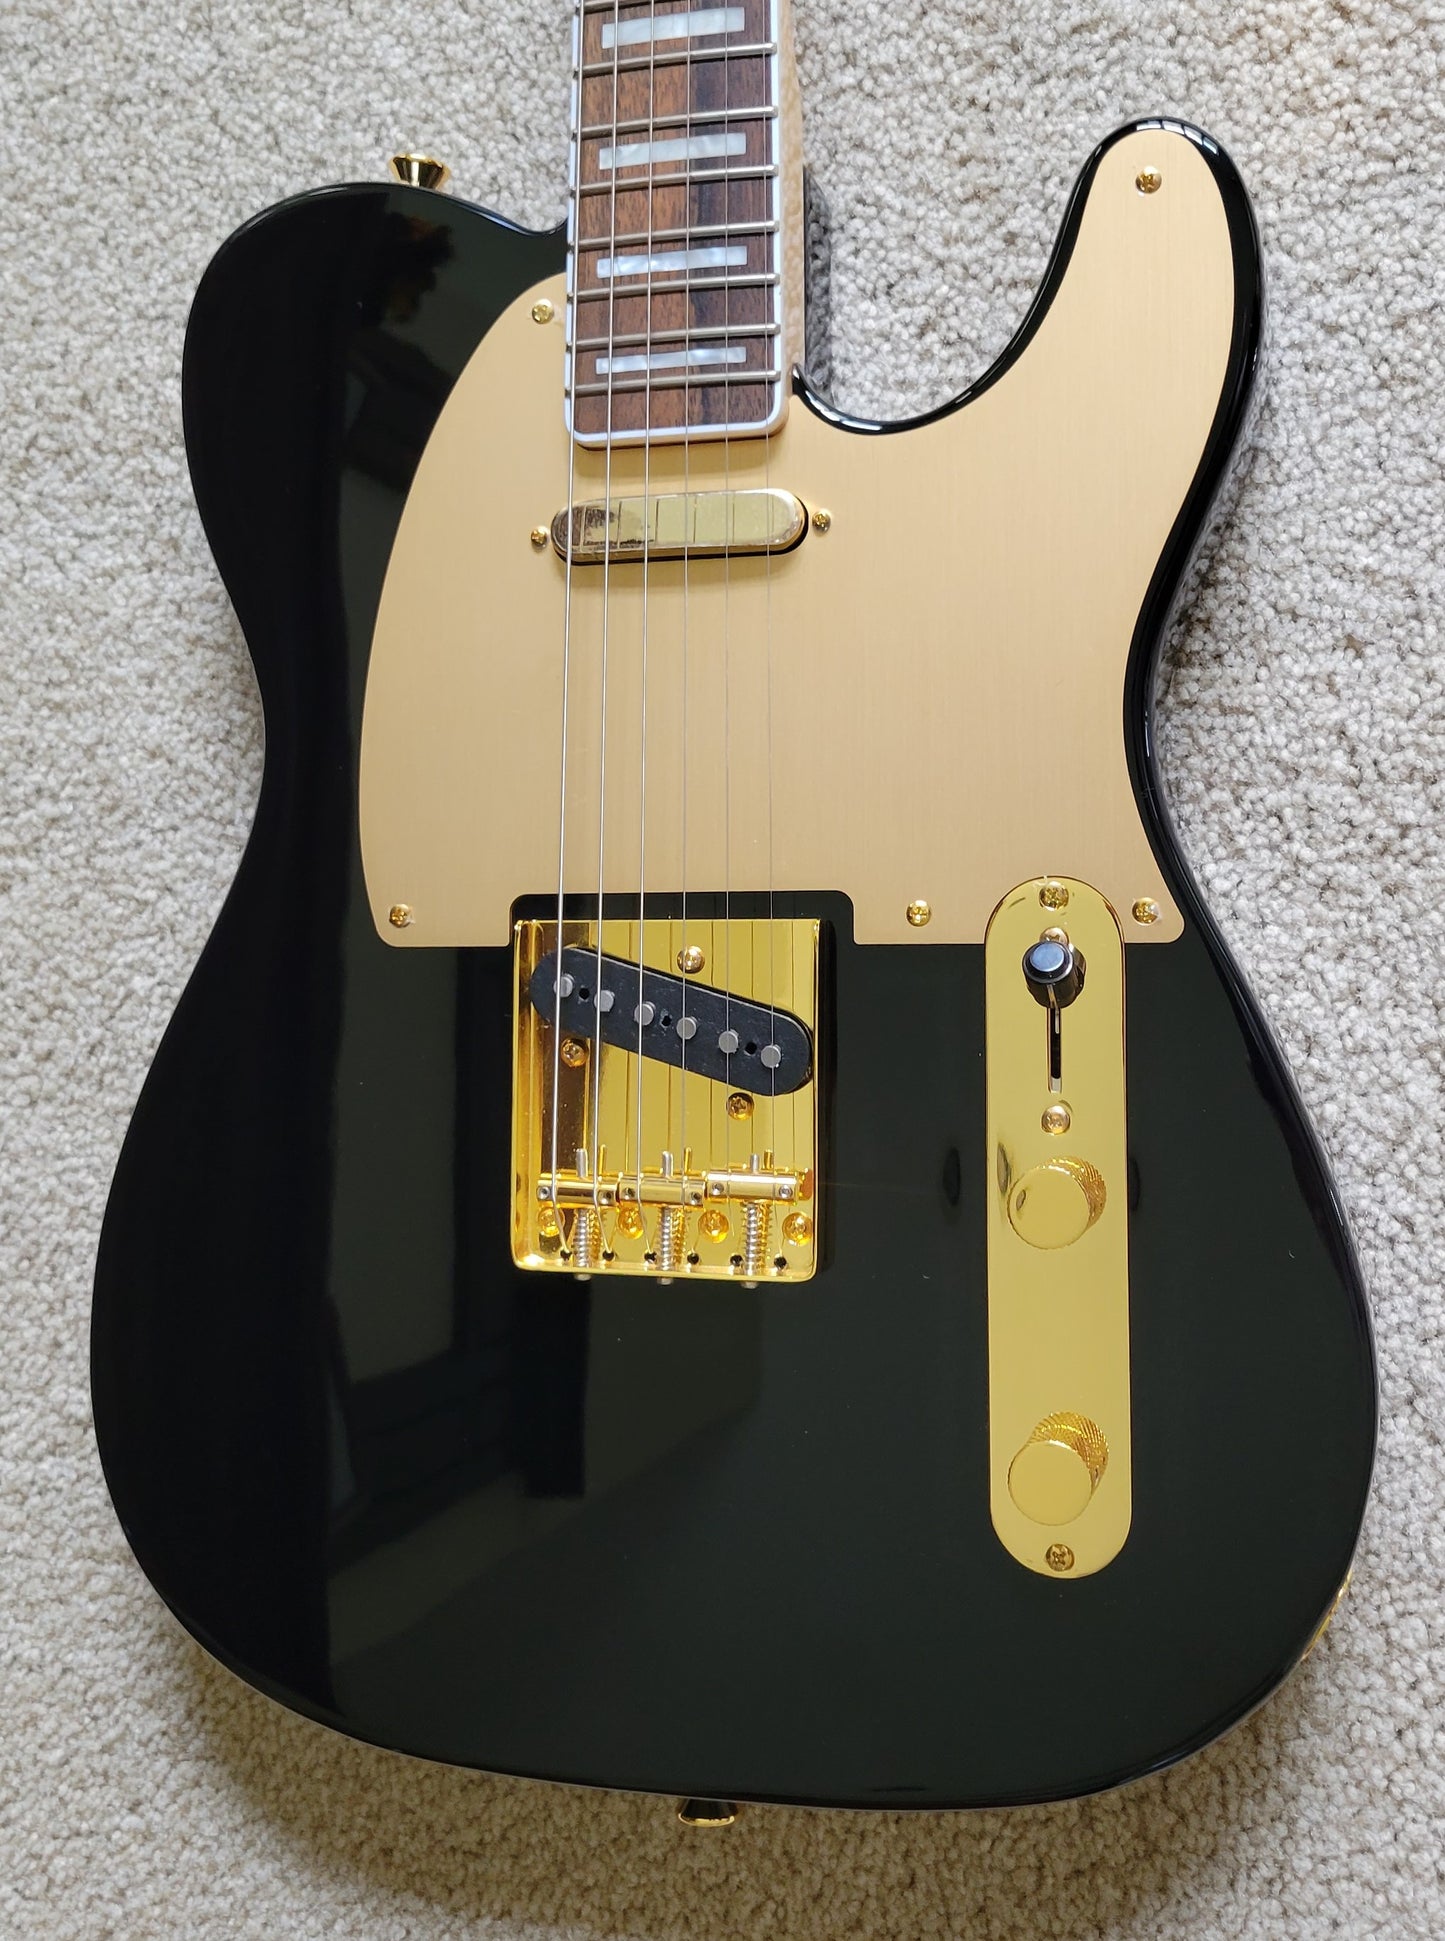 Fender Squier 40th Anniversary Telecaster Electric Guitar, Black Gold Edition, New TKL Gig Bag